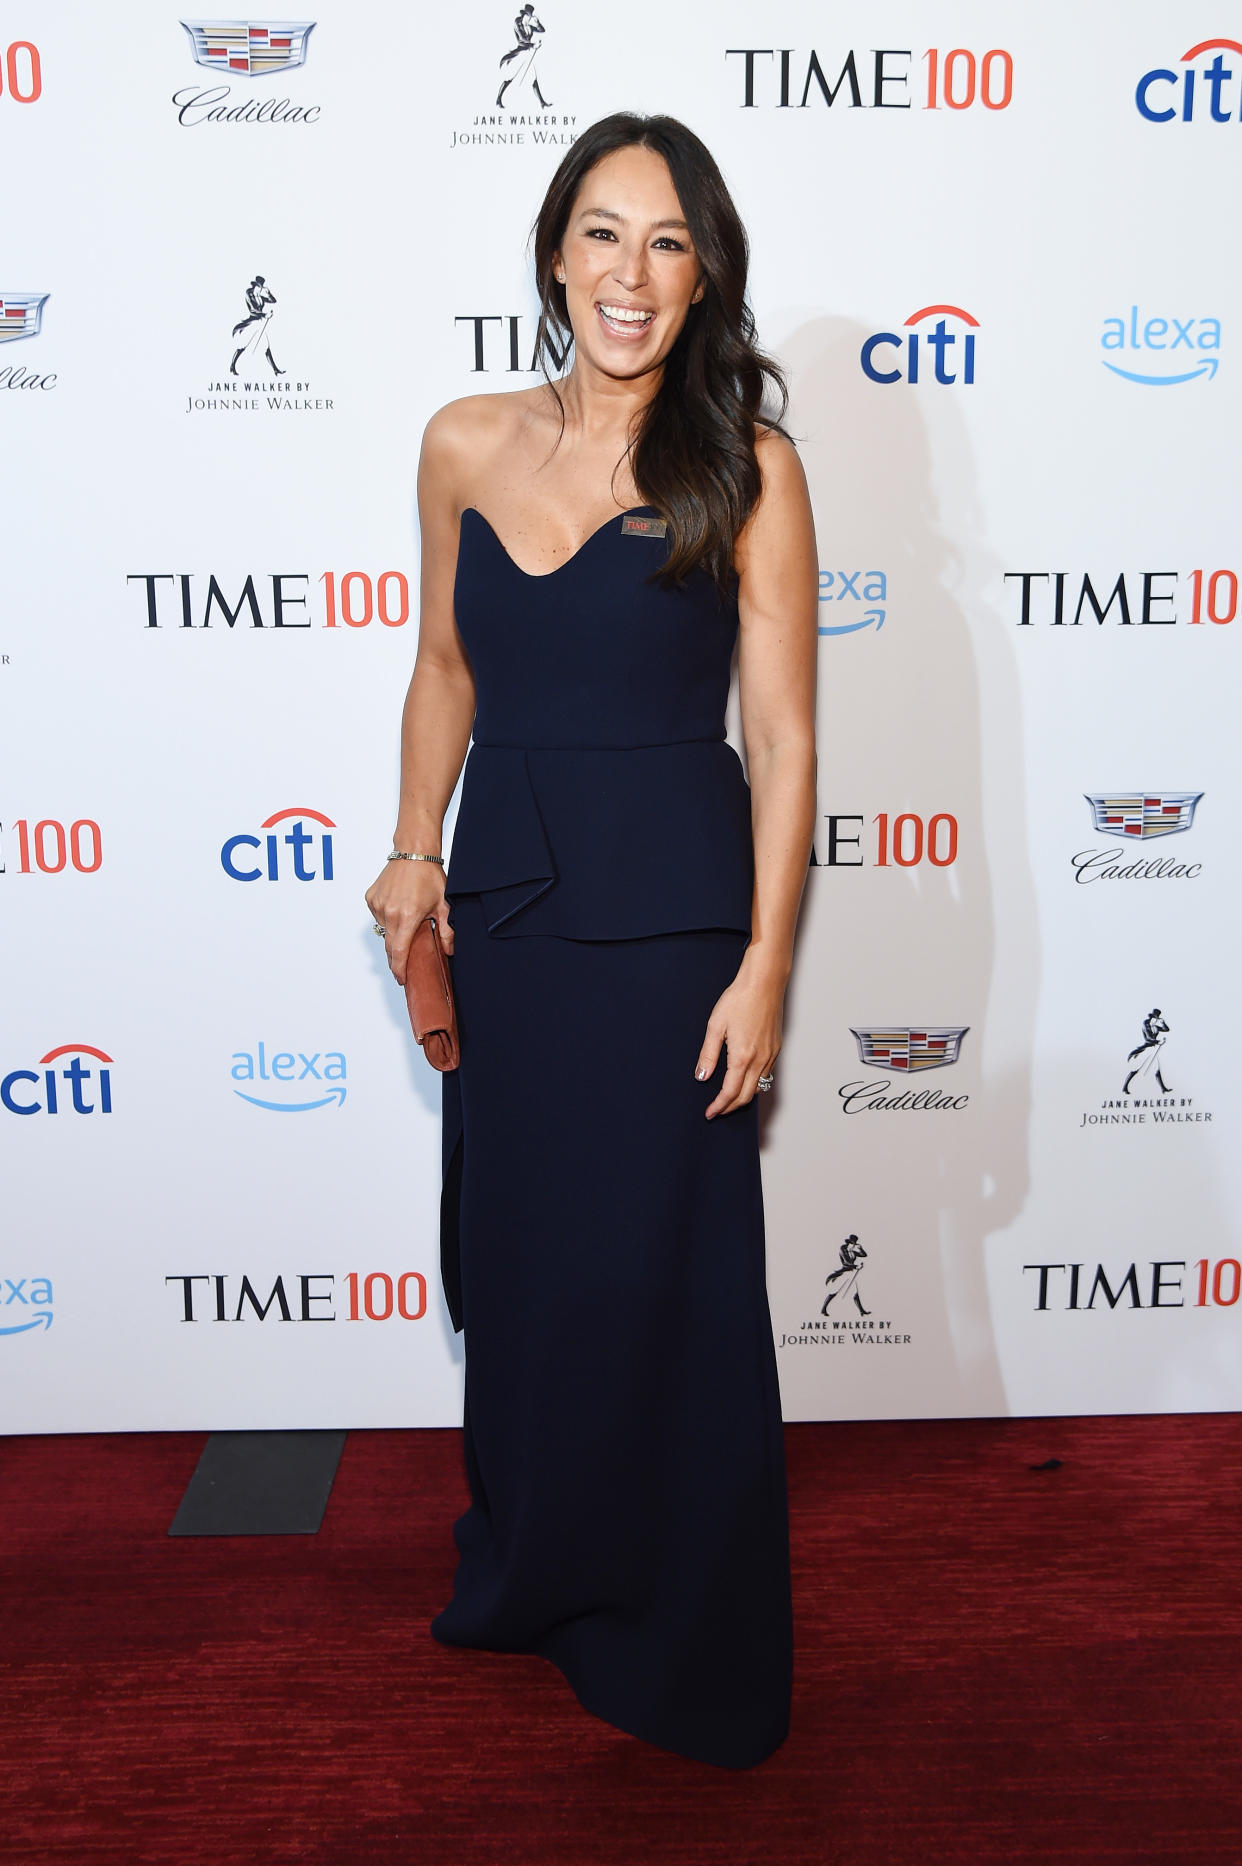 NEW YORK, NEW YORK - APRIL 23: Joanna Gaines attends the TIME 100 Gala 2019 Cocktails at Jazz at Lincoln Center on April 23, 2019 in New York City. (Photo by Larry Busacca/Getty Images for TIME)